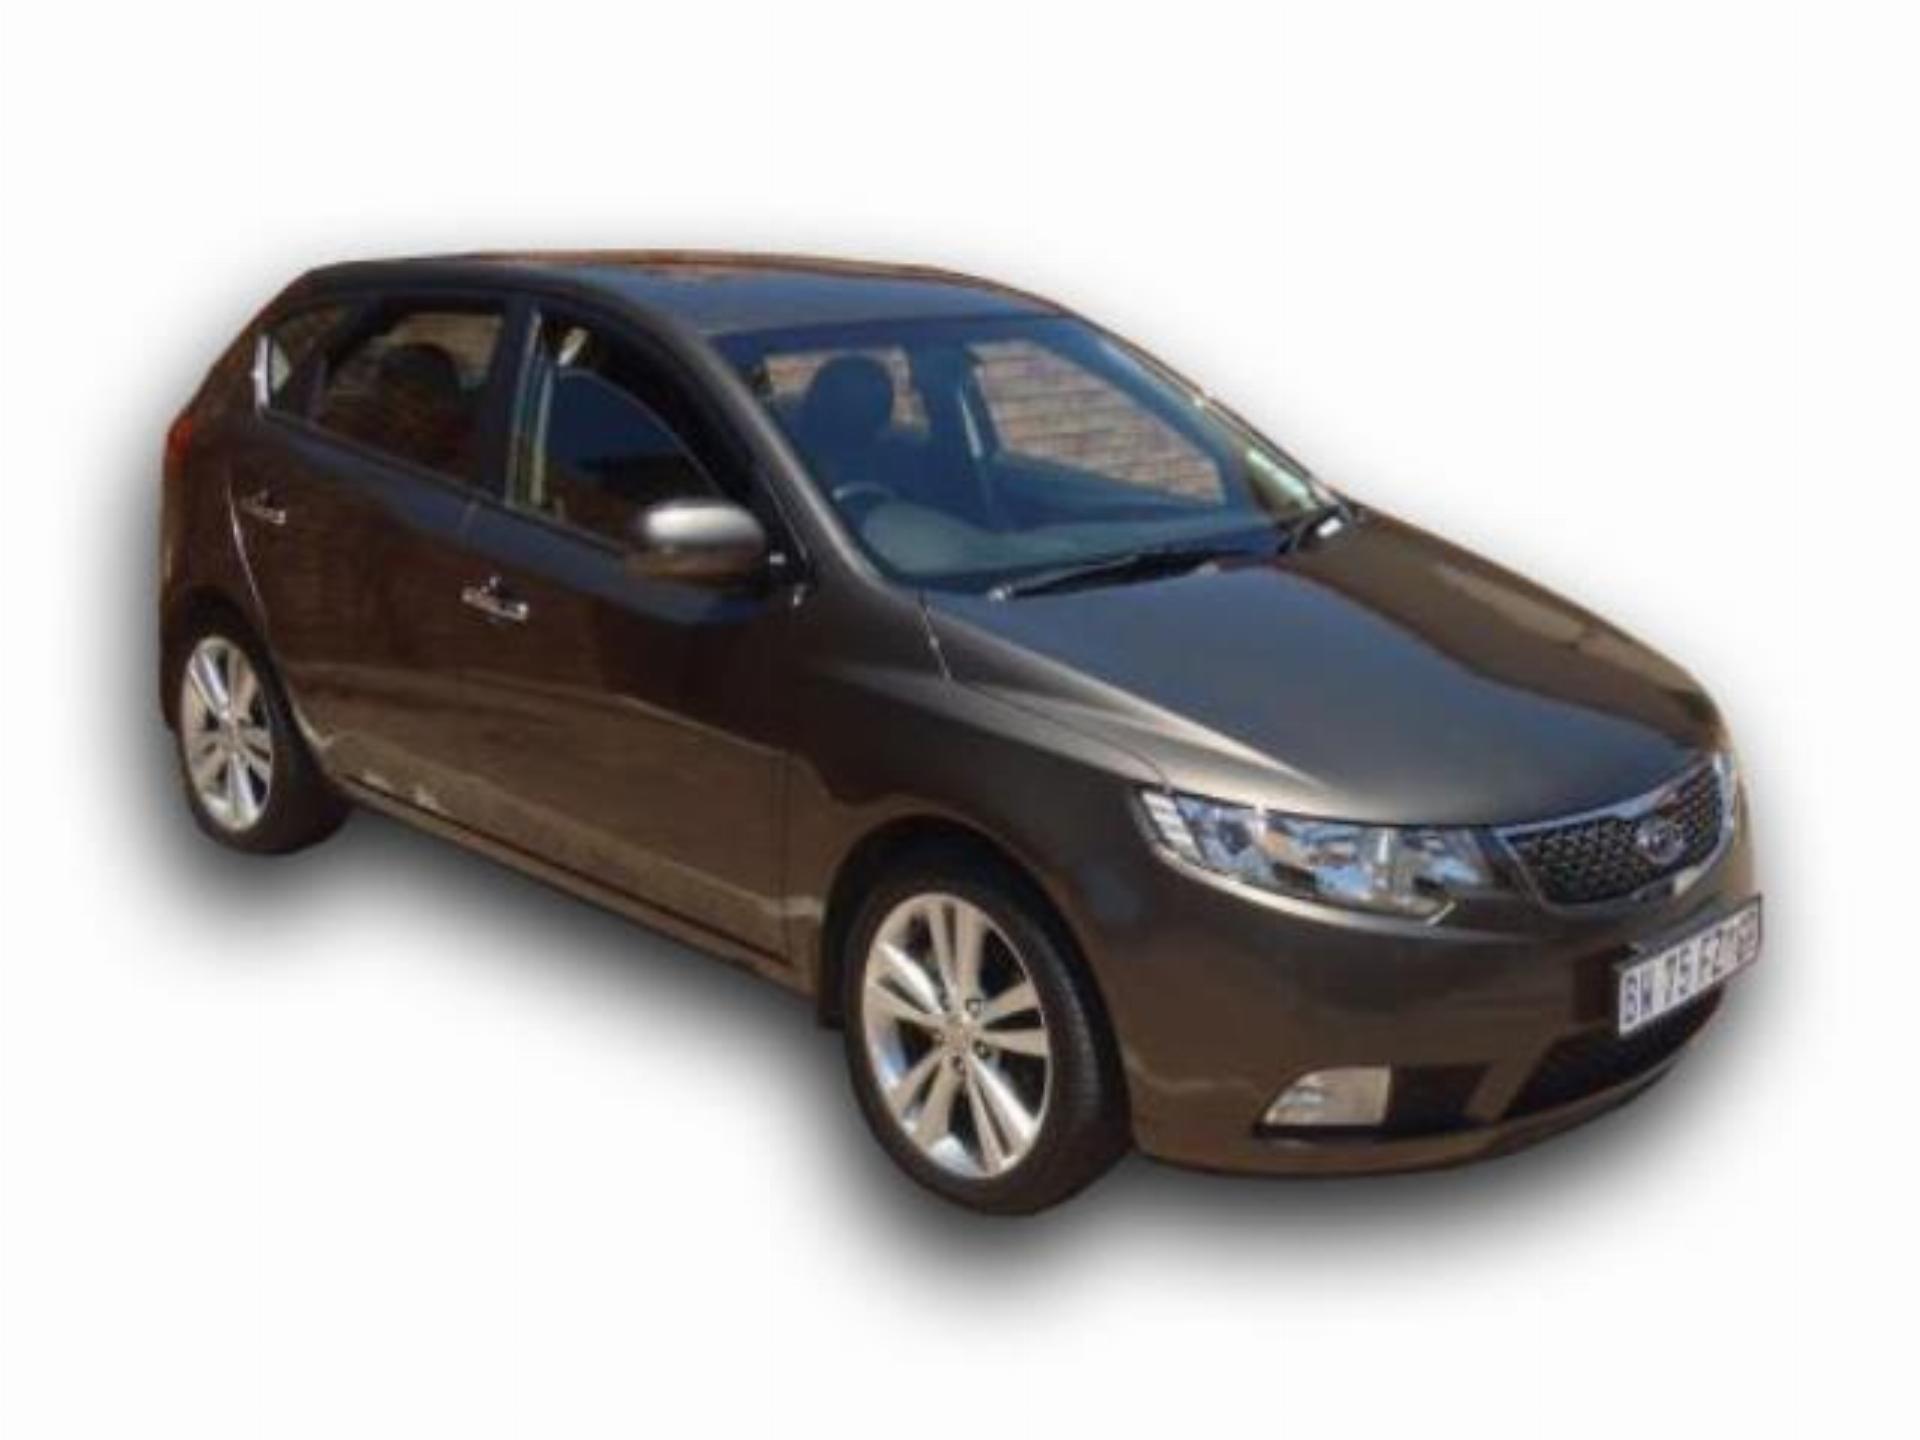 Used Kia Cerato 2.0 5DR 2012 on auction - PV1005091